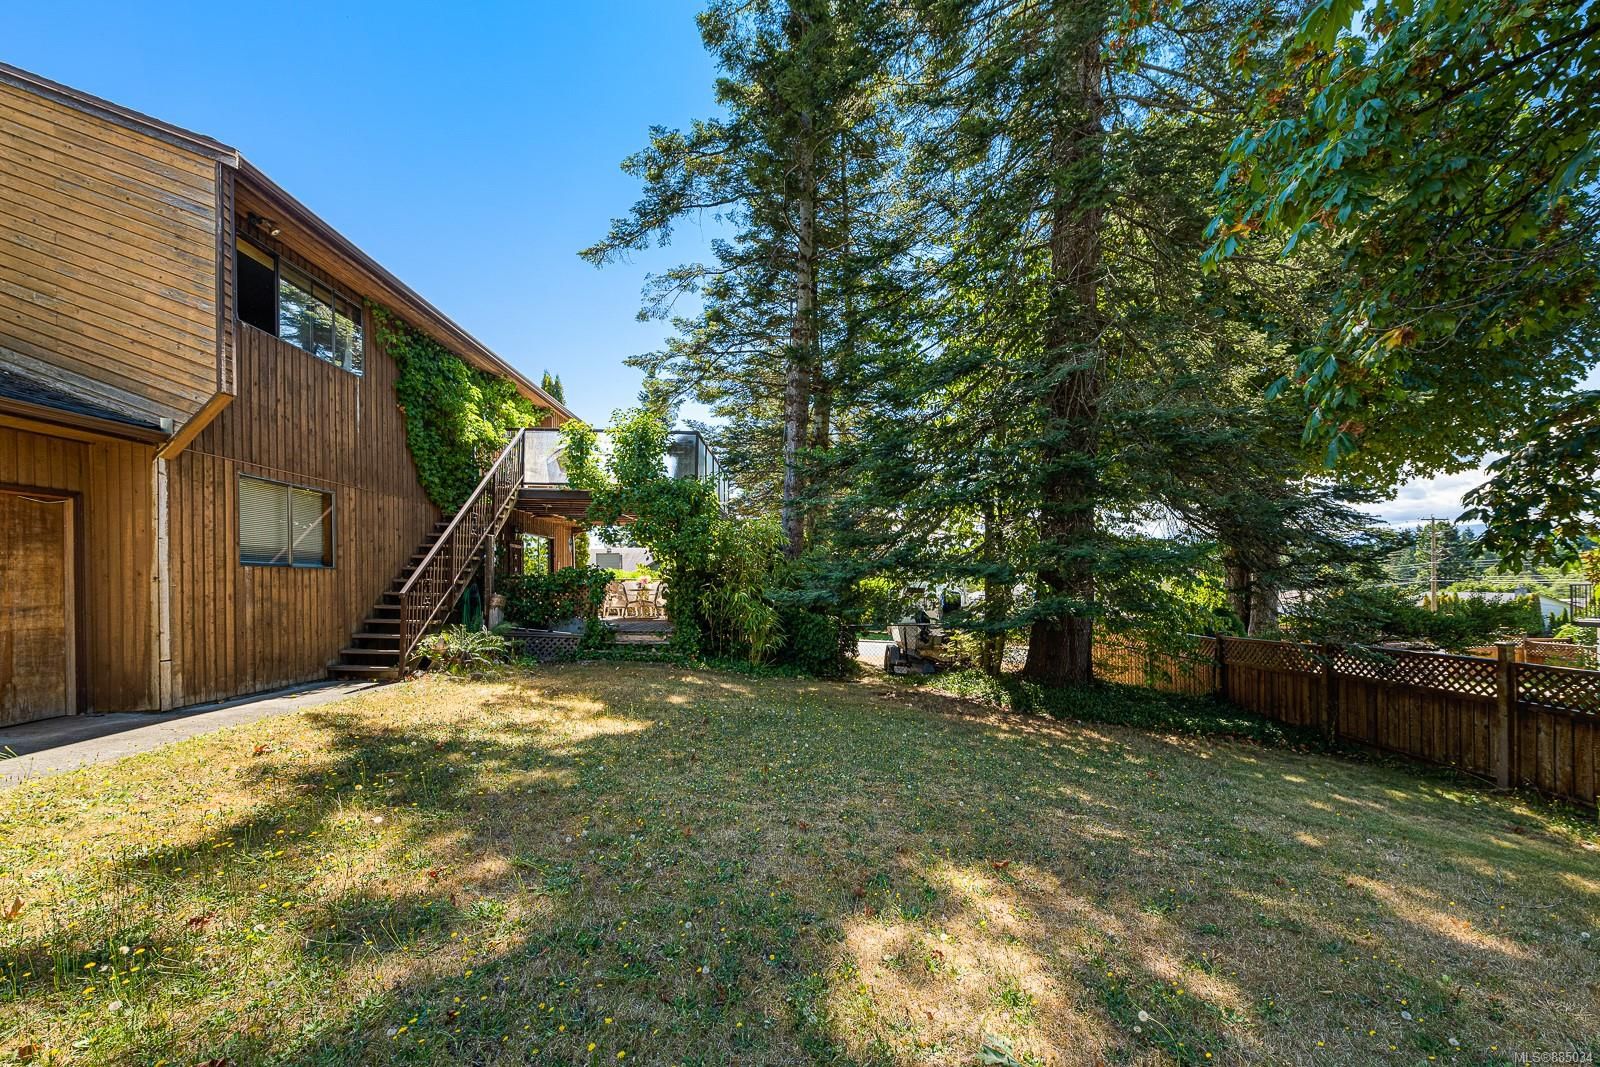 Main Photo: 683 Totem Cres in Comox: CV Comox (Town of) House for sale (Comox Valley)  : MLS®# 885034